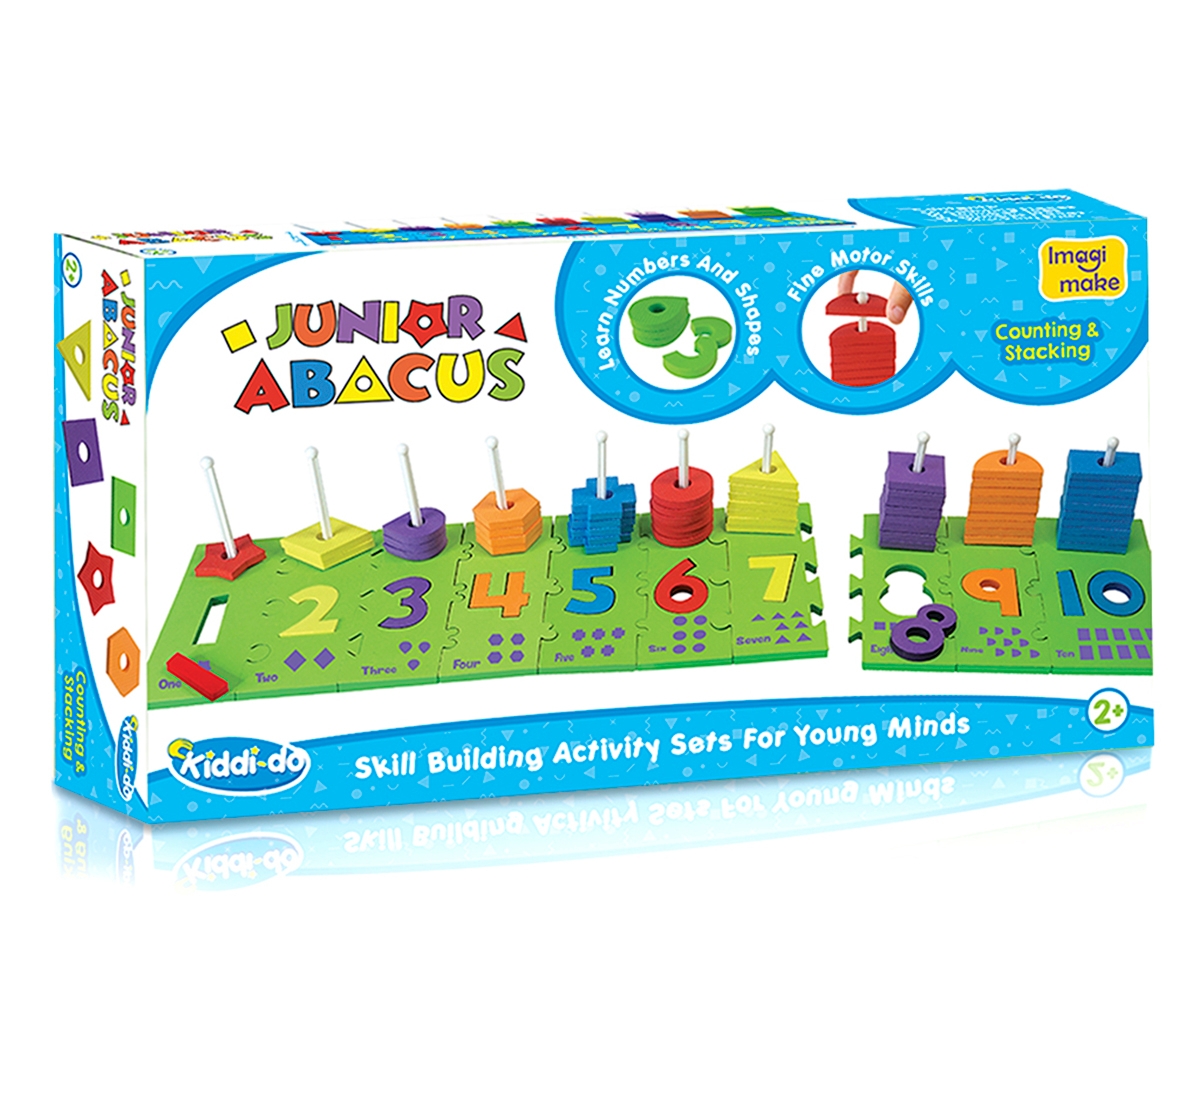 Imagimake | Imagimake Junior Abacus Puzzles for Kids age 3Y+